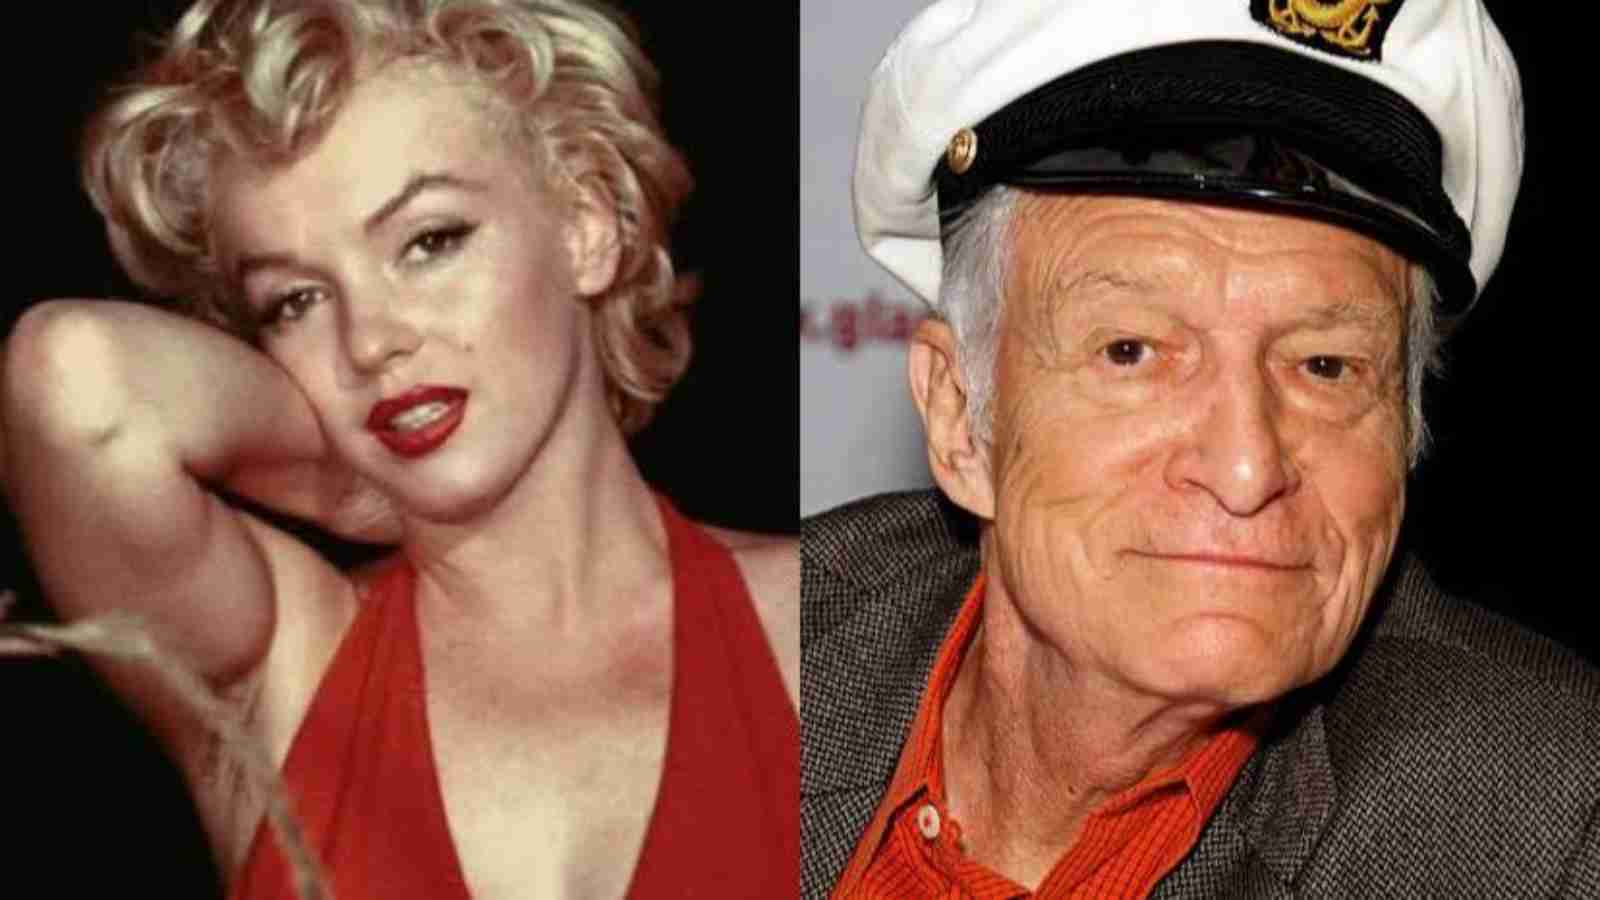 Hugh Hefner didn't ask for Marilyn Monroe's permission to use her nude pictures in his Playboy magazine